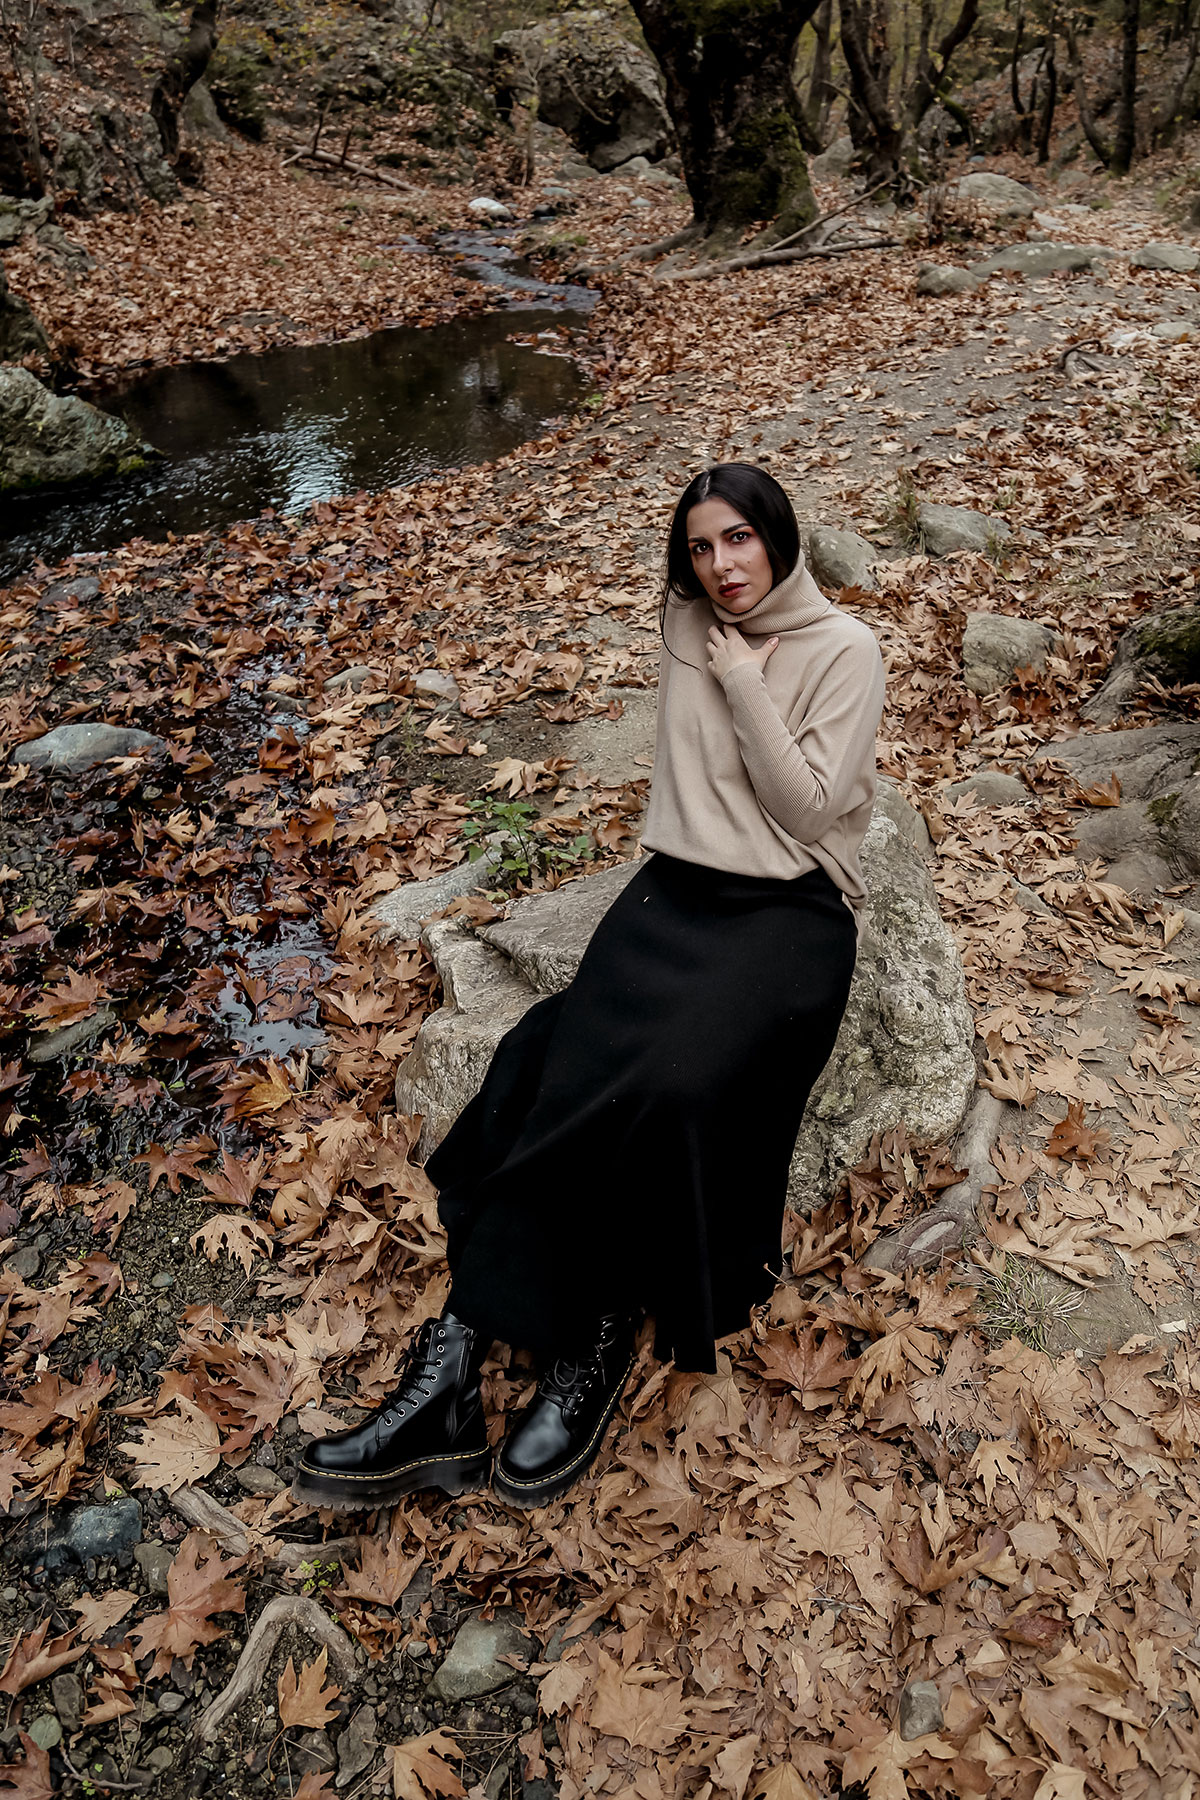 favourite fall wardrobe staples by Stella Asteria - wearing turtleneck sweater with knit skirt and Dr Martens boots